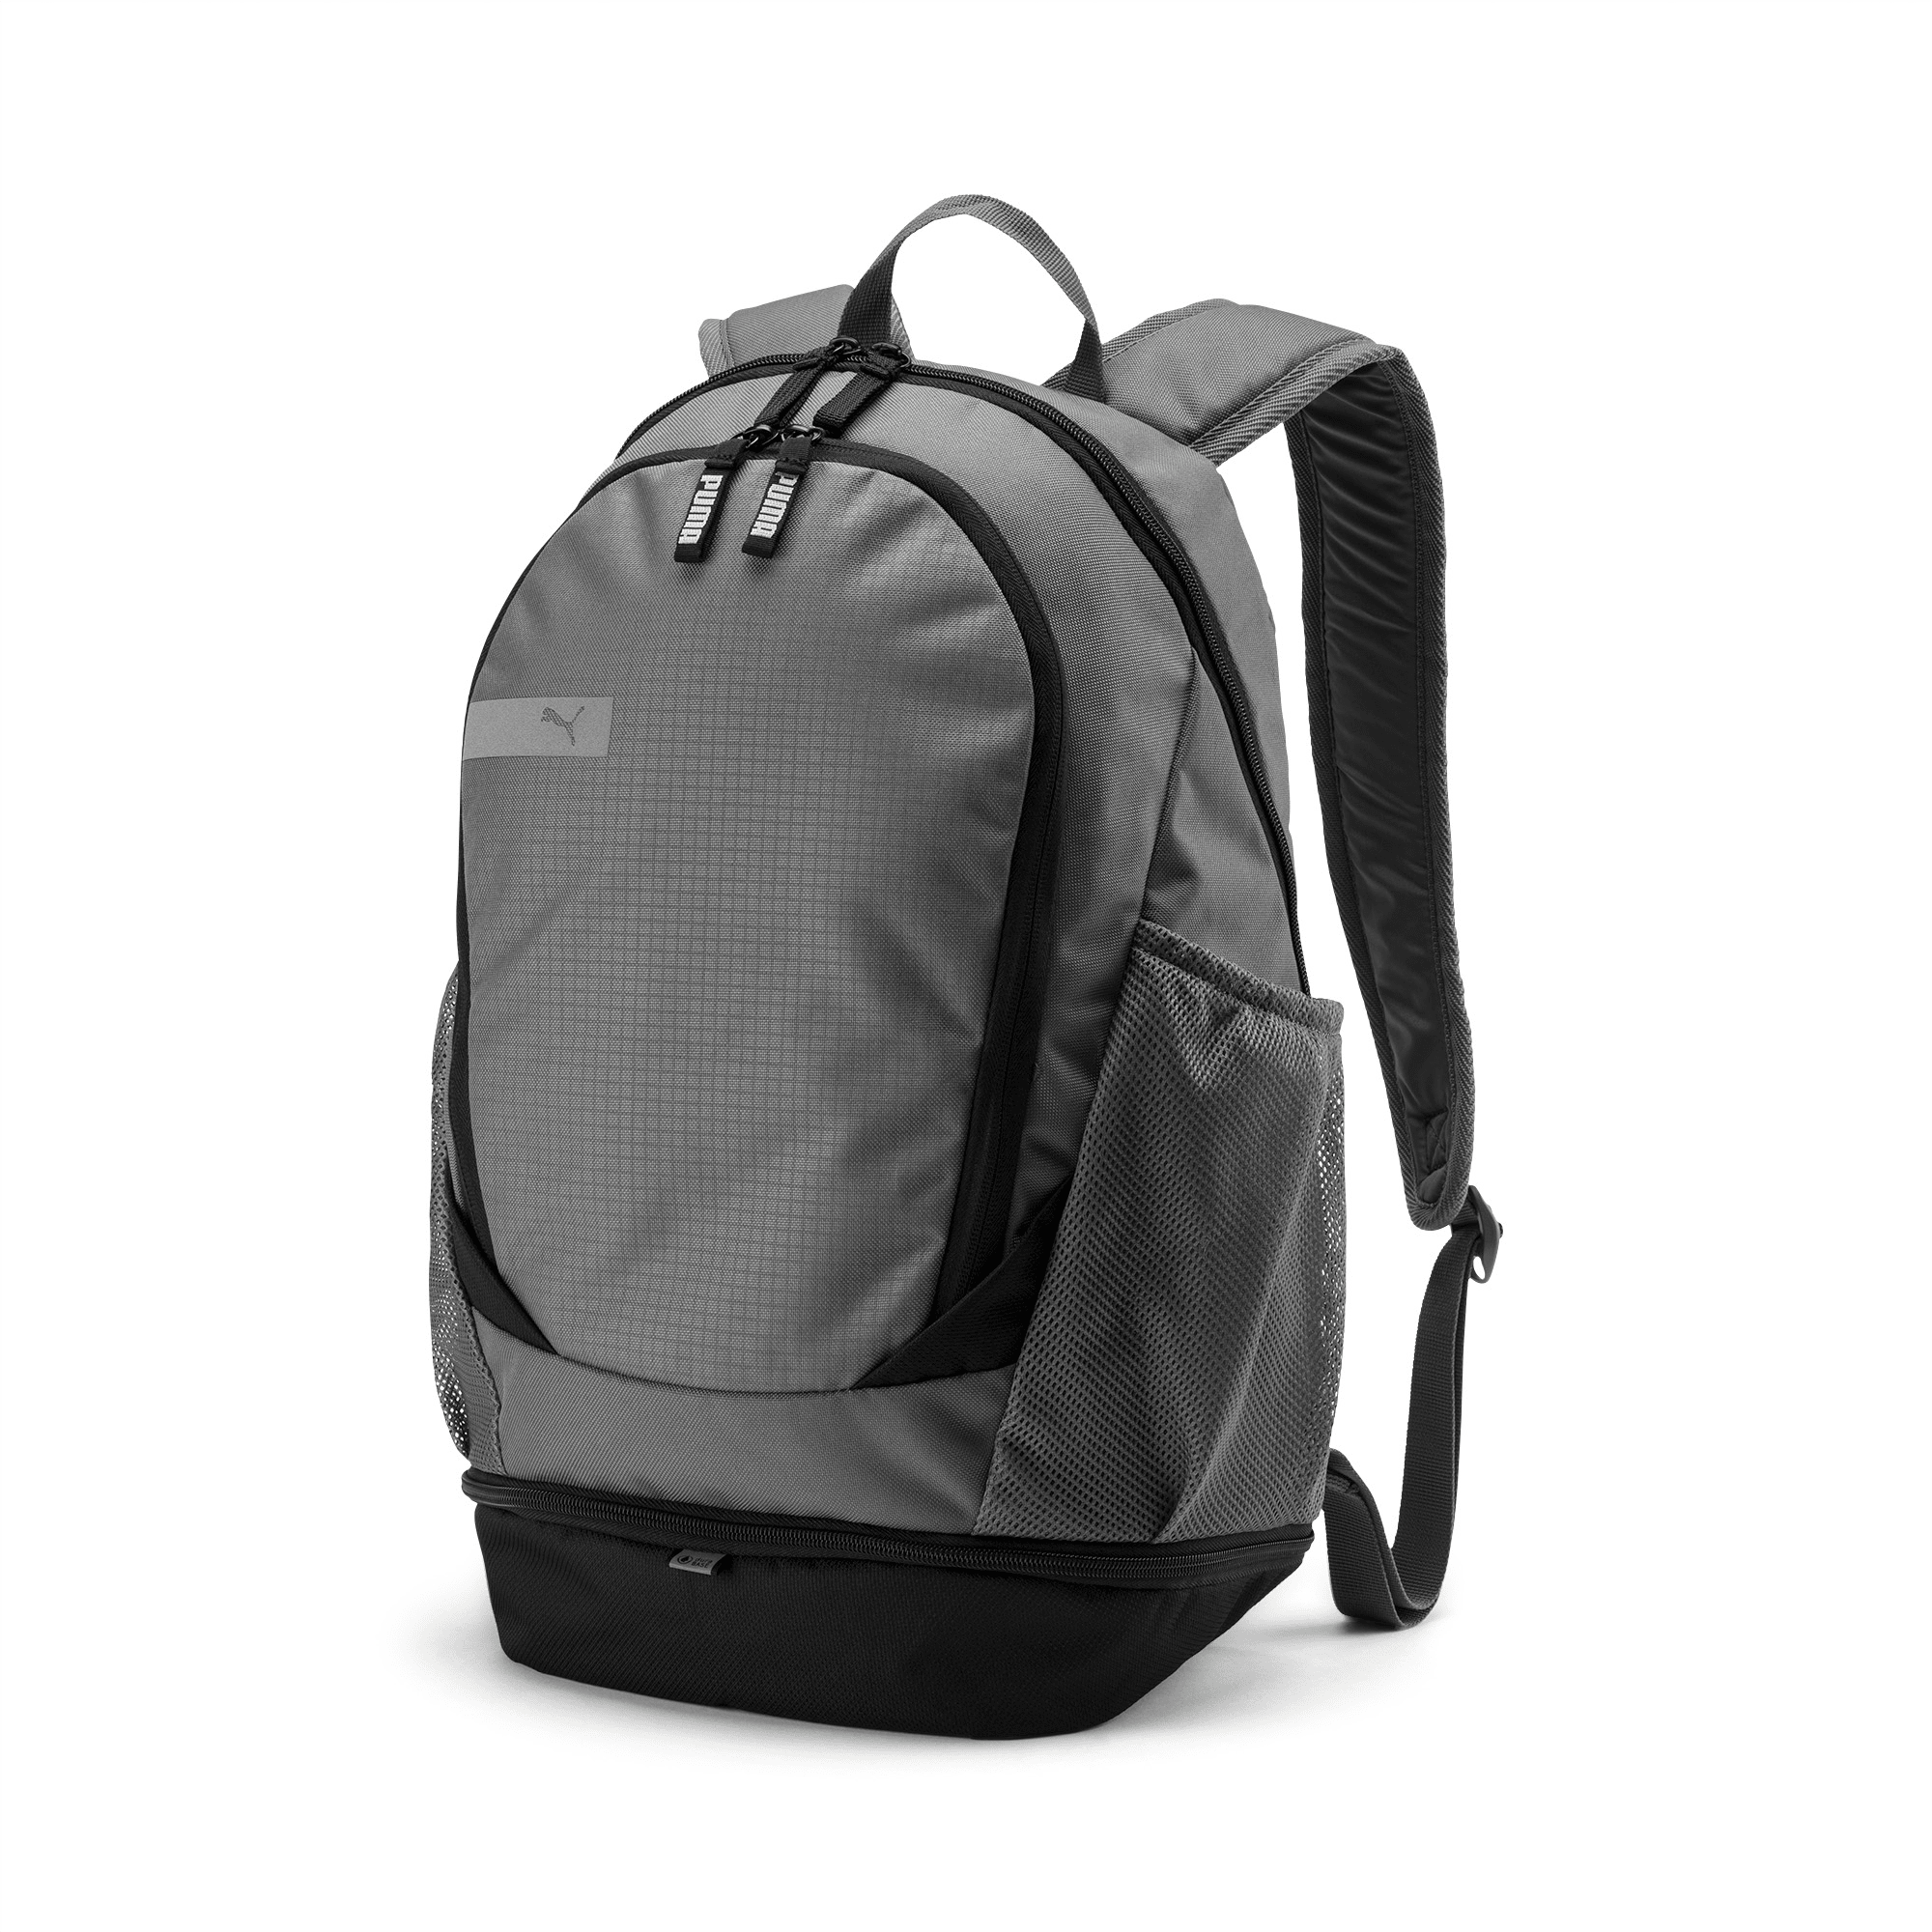 puma backpack review